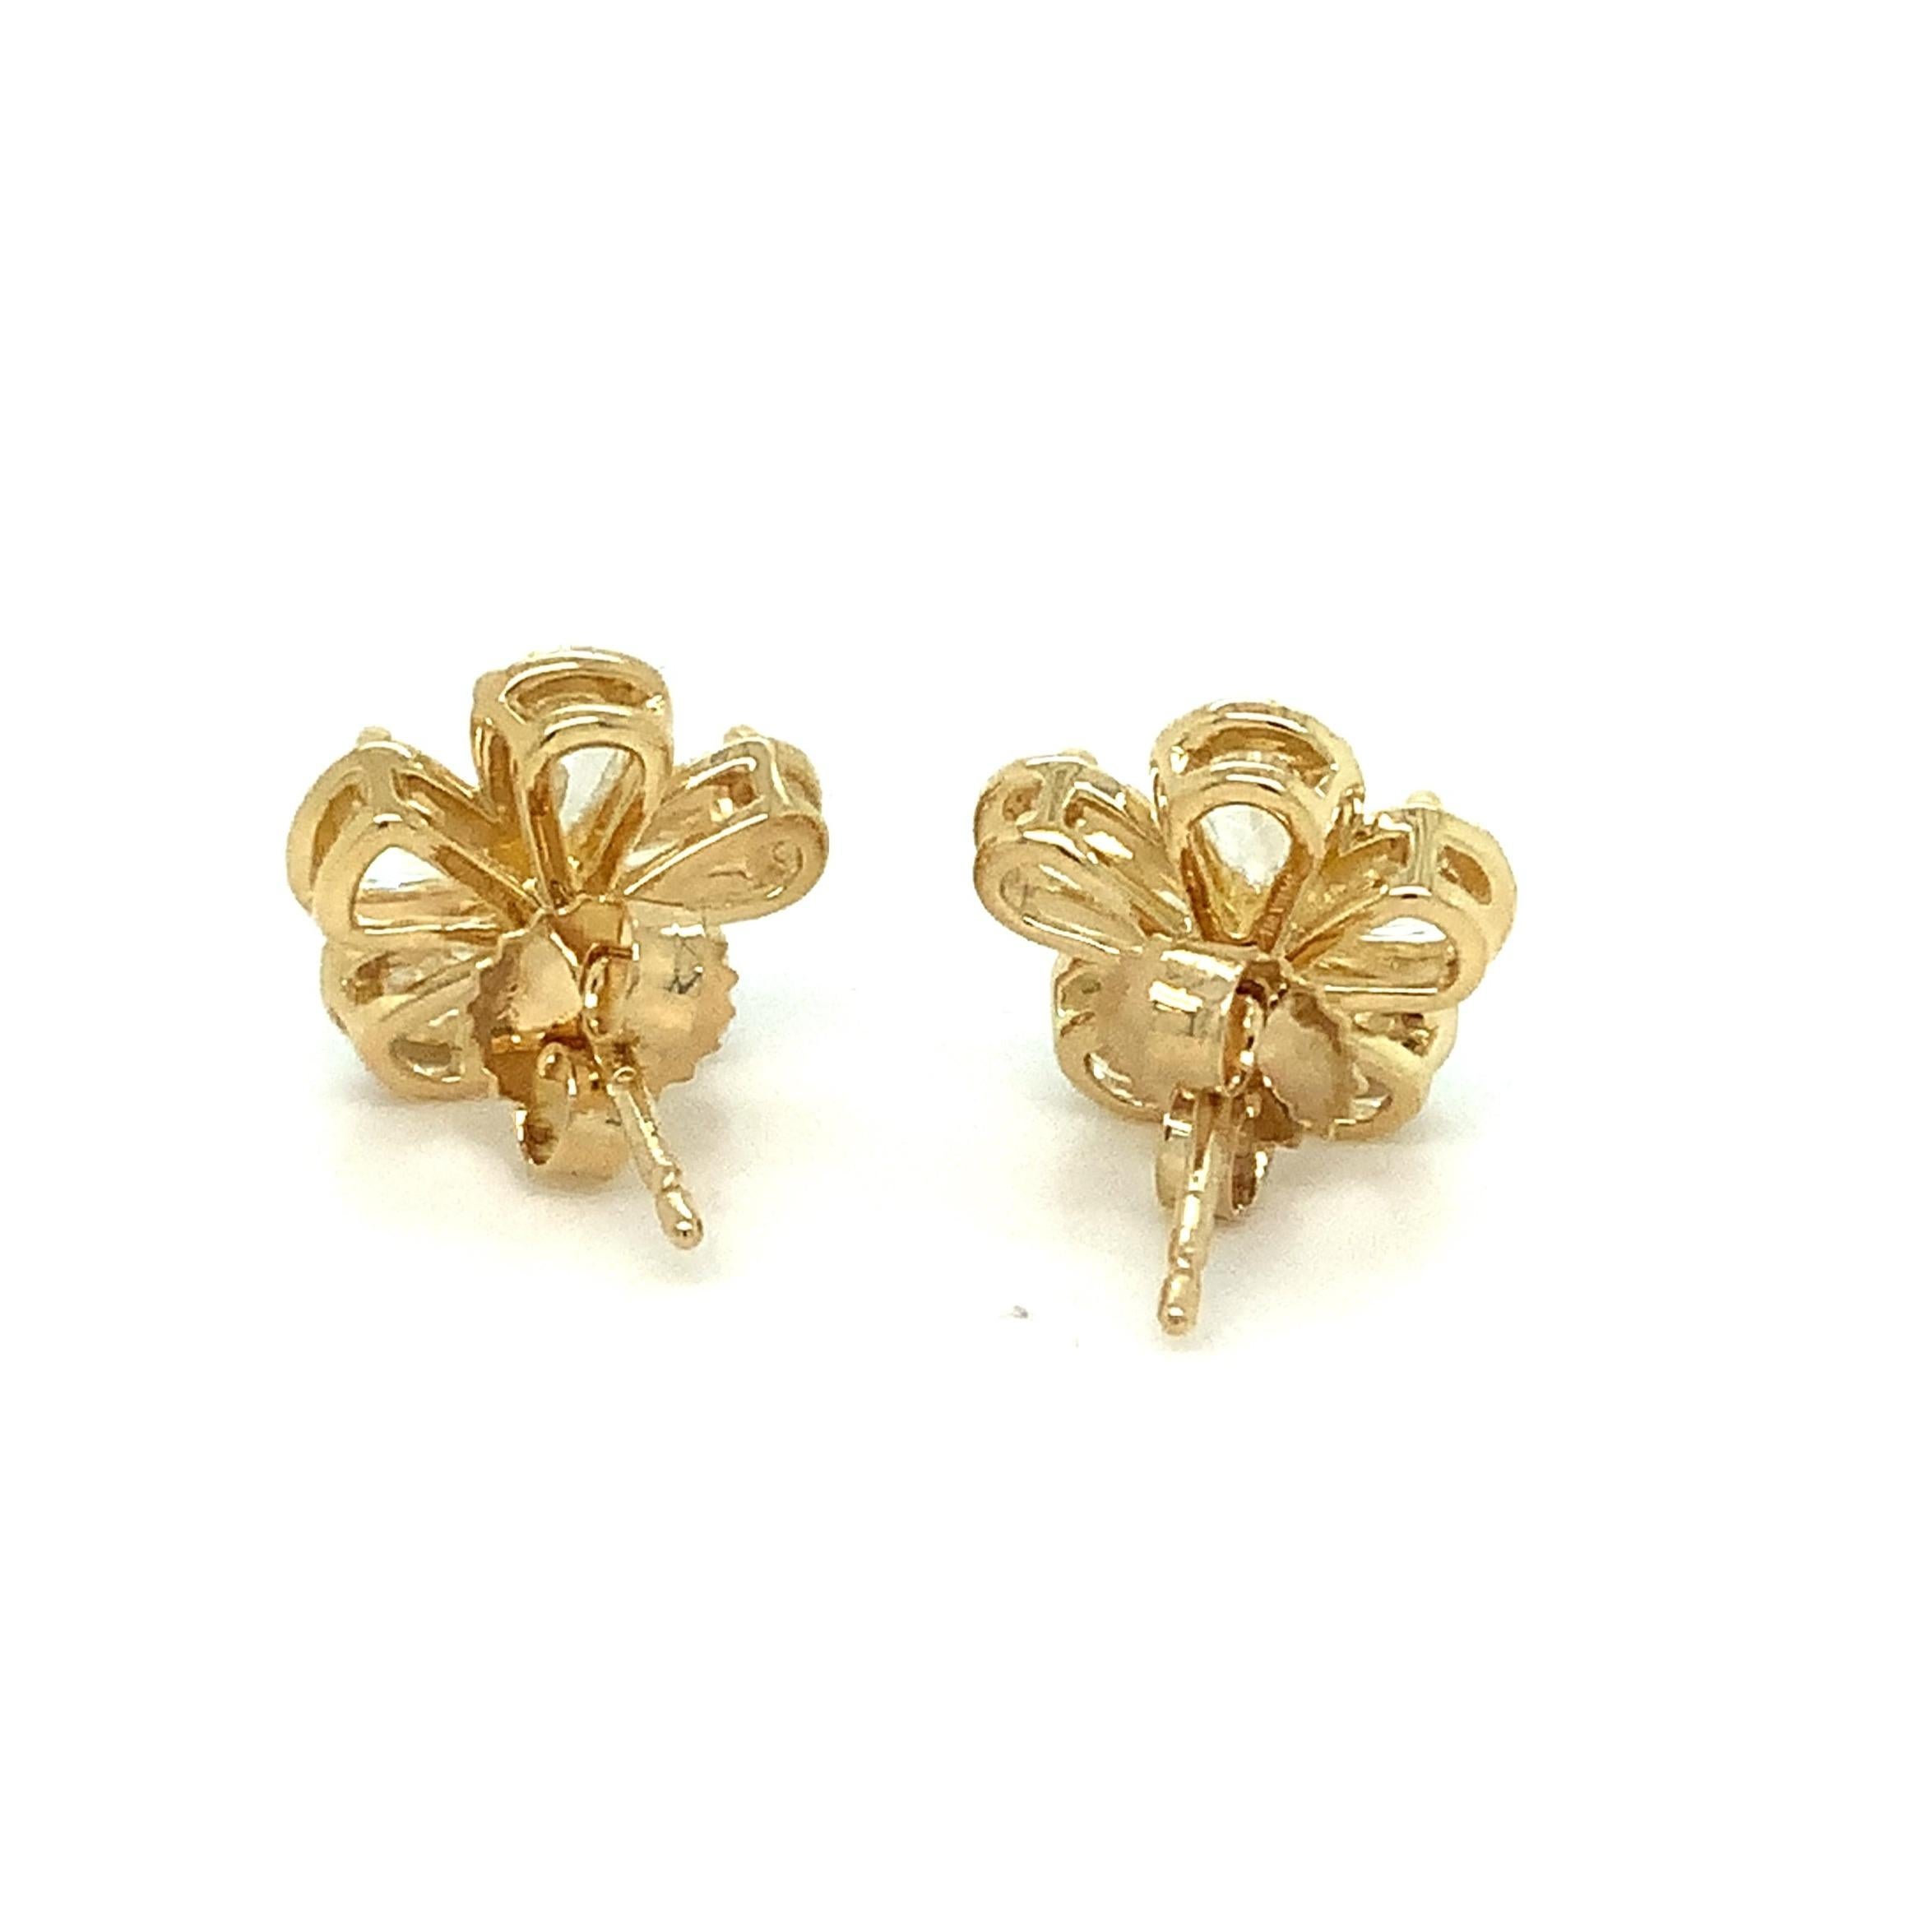 Christopher Designs L'Amour Crisscut® Pear Shape Floral Cluster Earrings set in 18 kt Yellow Gold. These Beautiful Flowers will never need watering. These earrings contain 10 L'Amour Crisscut® Pear Shape = 1.96 cts t.w.  These Diamonds are G in